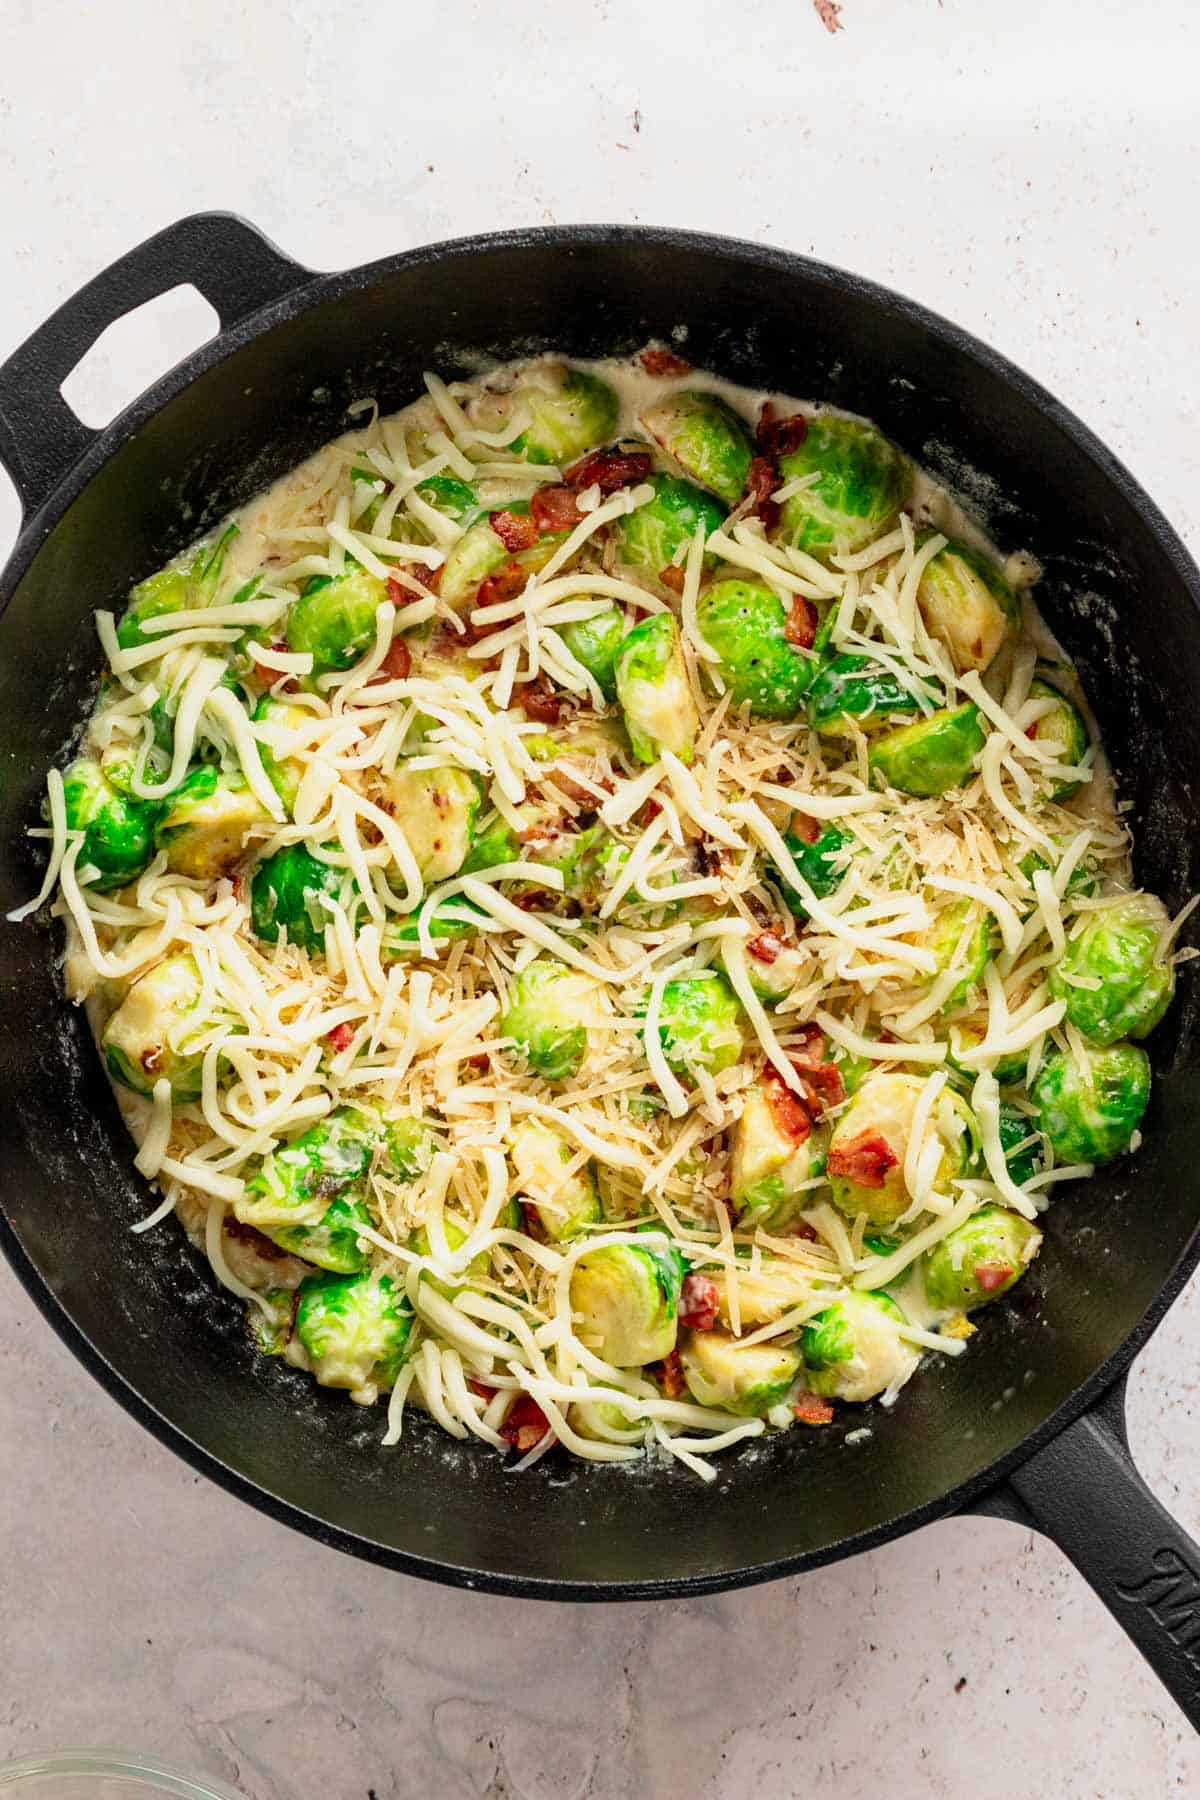 adding grated cheese on top of brussel sprouts.